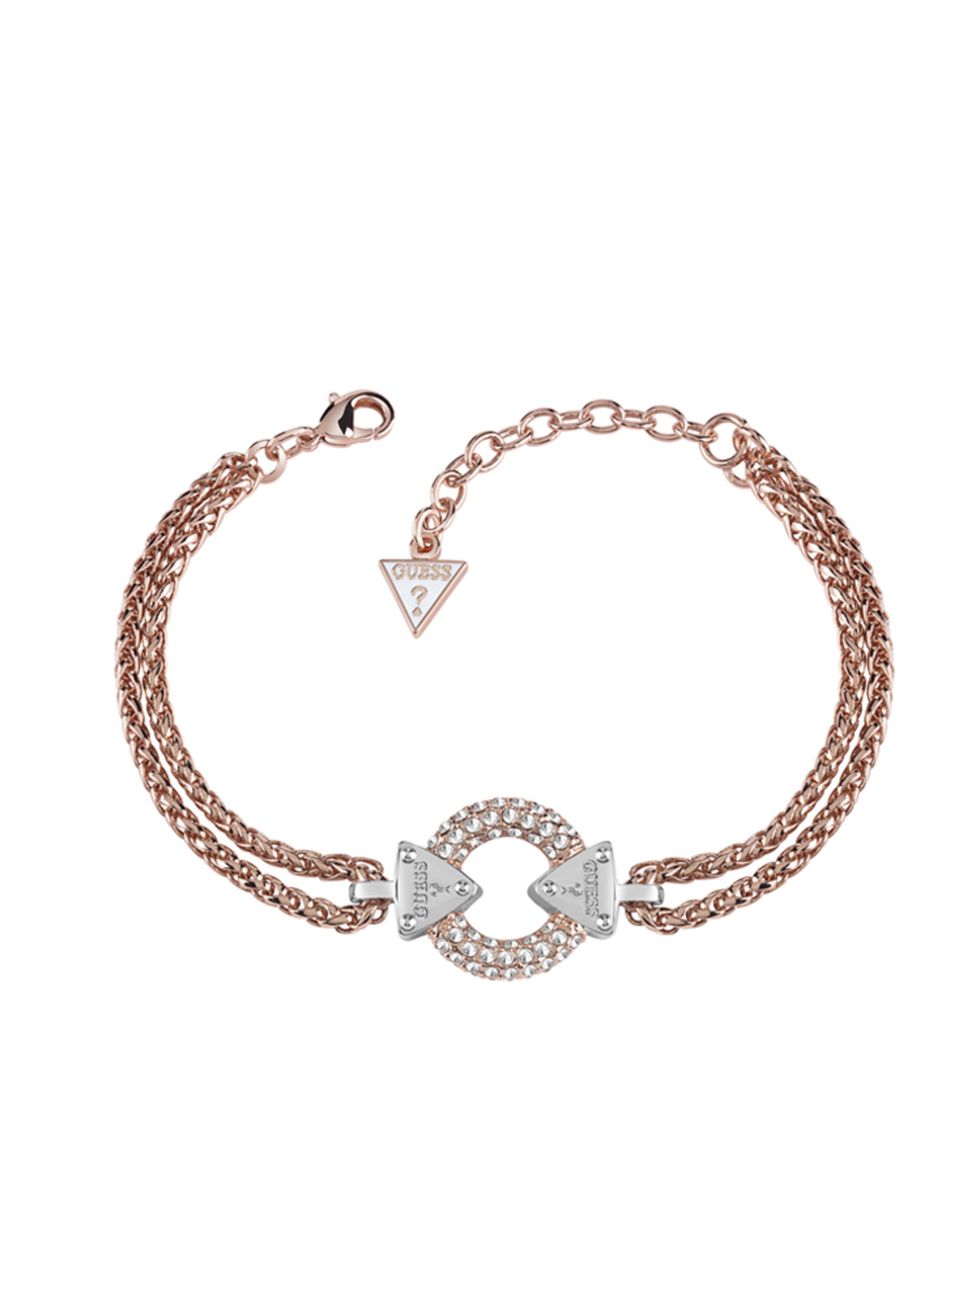 <p><a href="http://www.hsamuel.co.uk/webstore/d/3765350/guess+rose+gold+plated+chain+circle+lock+bracelet/" style="line-height: 20.8px;" target="_blank">Embrace Me</a> Rose Gold Plated Bracelet, £95</p>